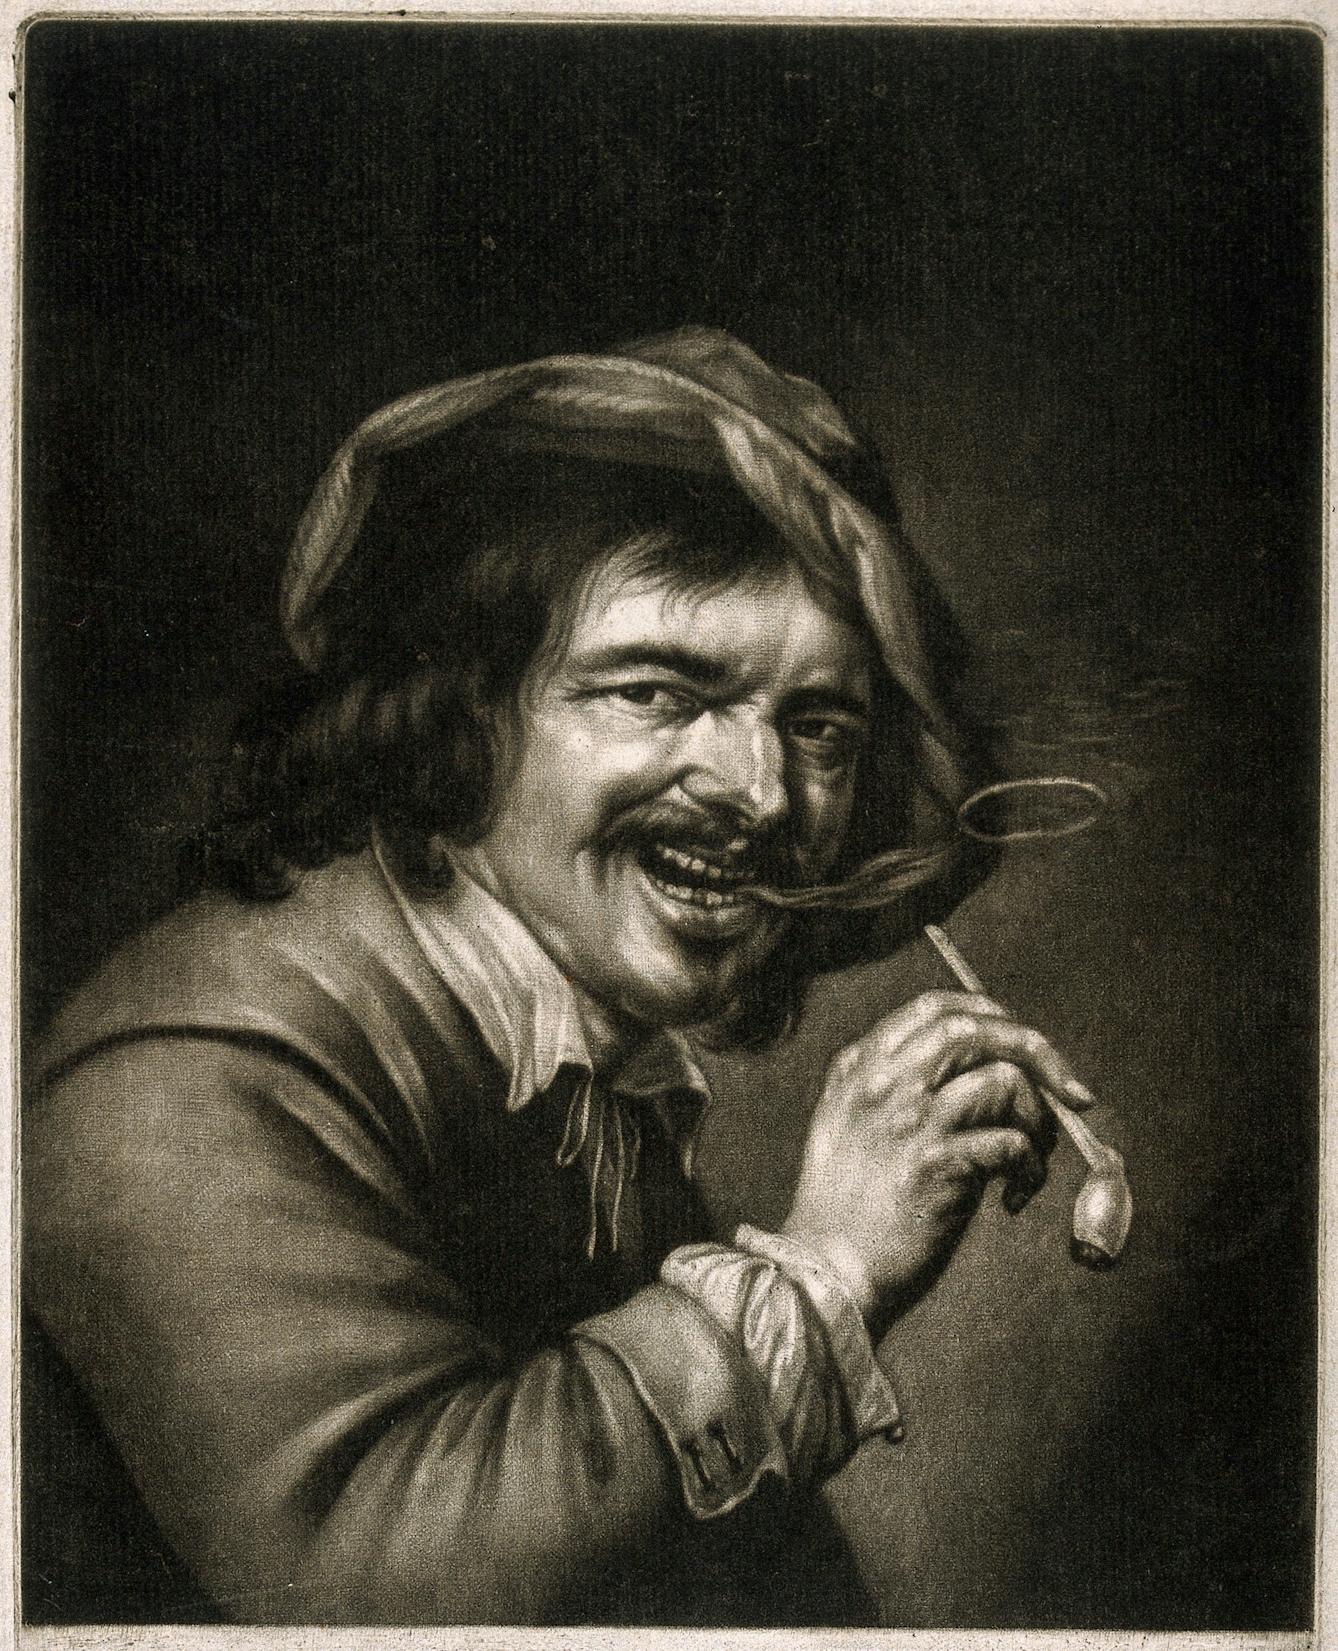 Monochrome mezzotint of a man holding a tobacco pipe and blowing a smoke ring.